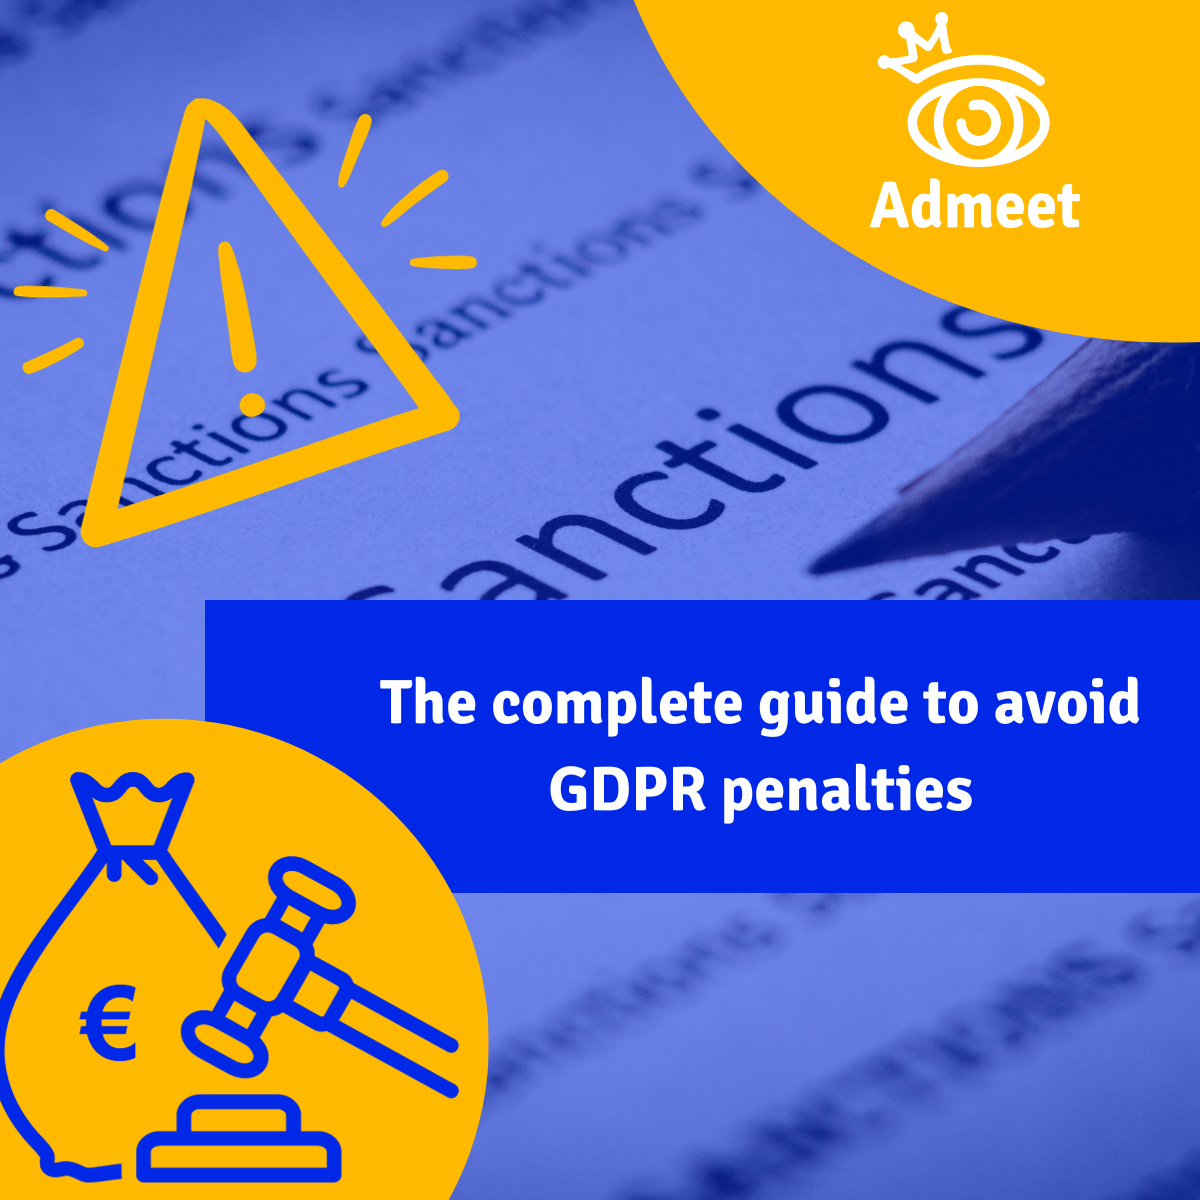 The complete guide to avoid GDPR penalties